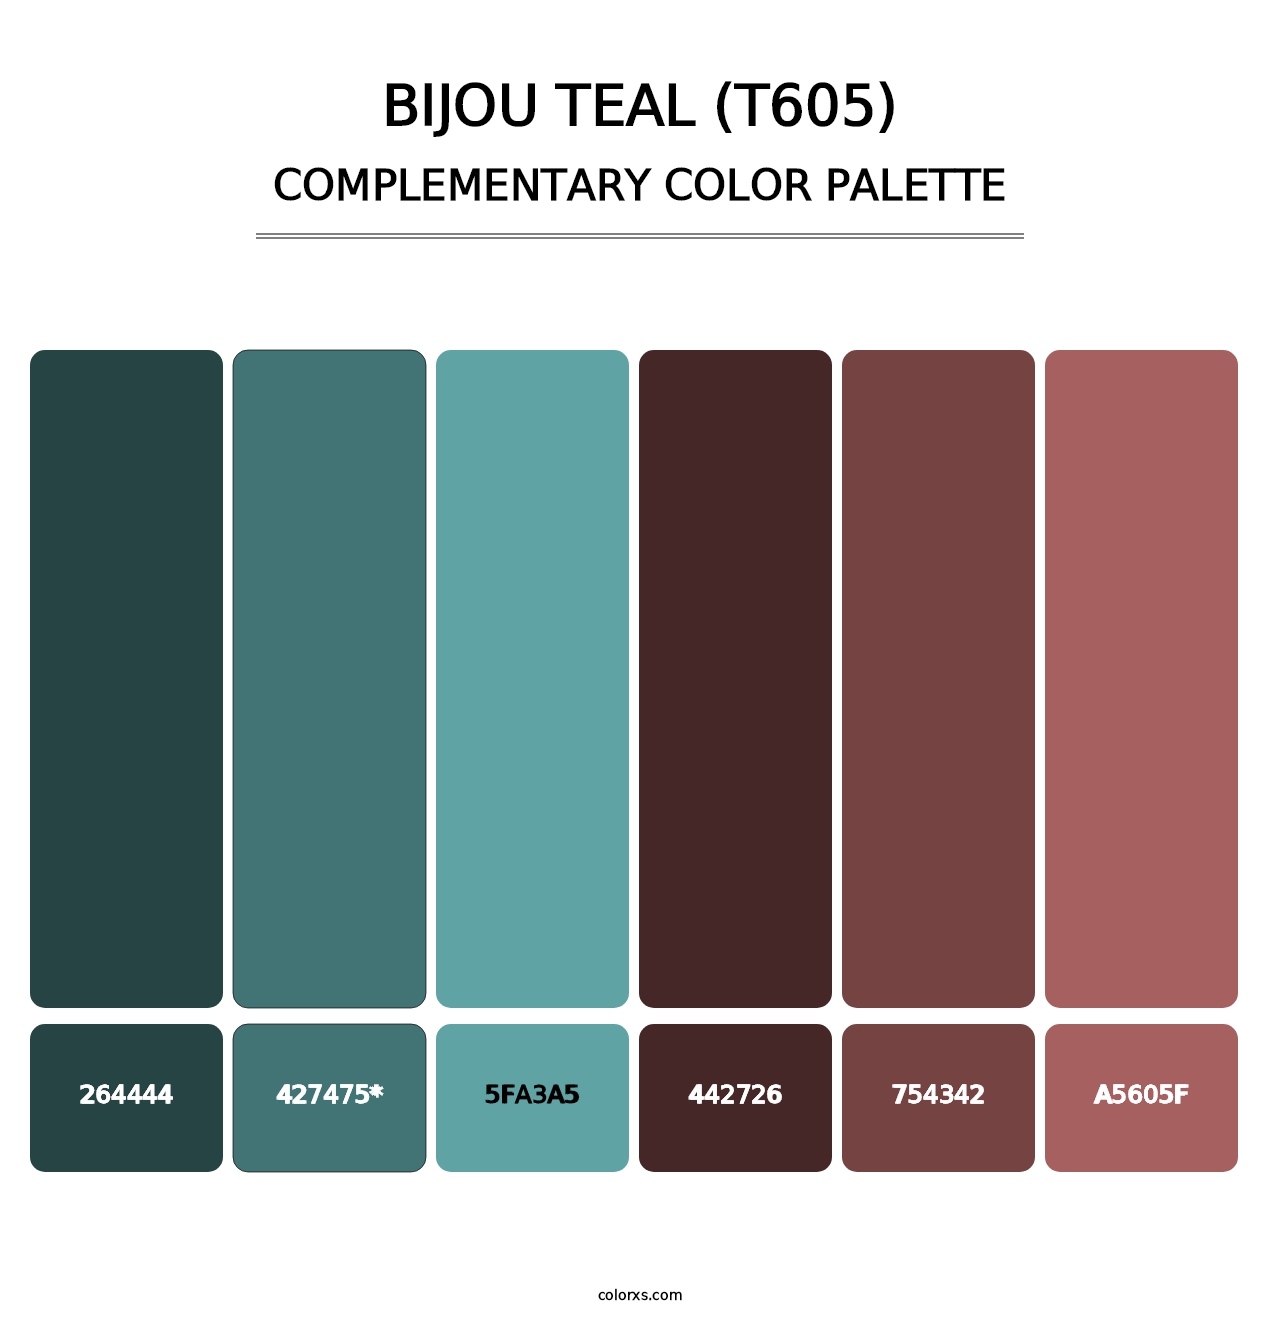 Bijou Teal (T605) - Complementary Color Palette